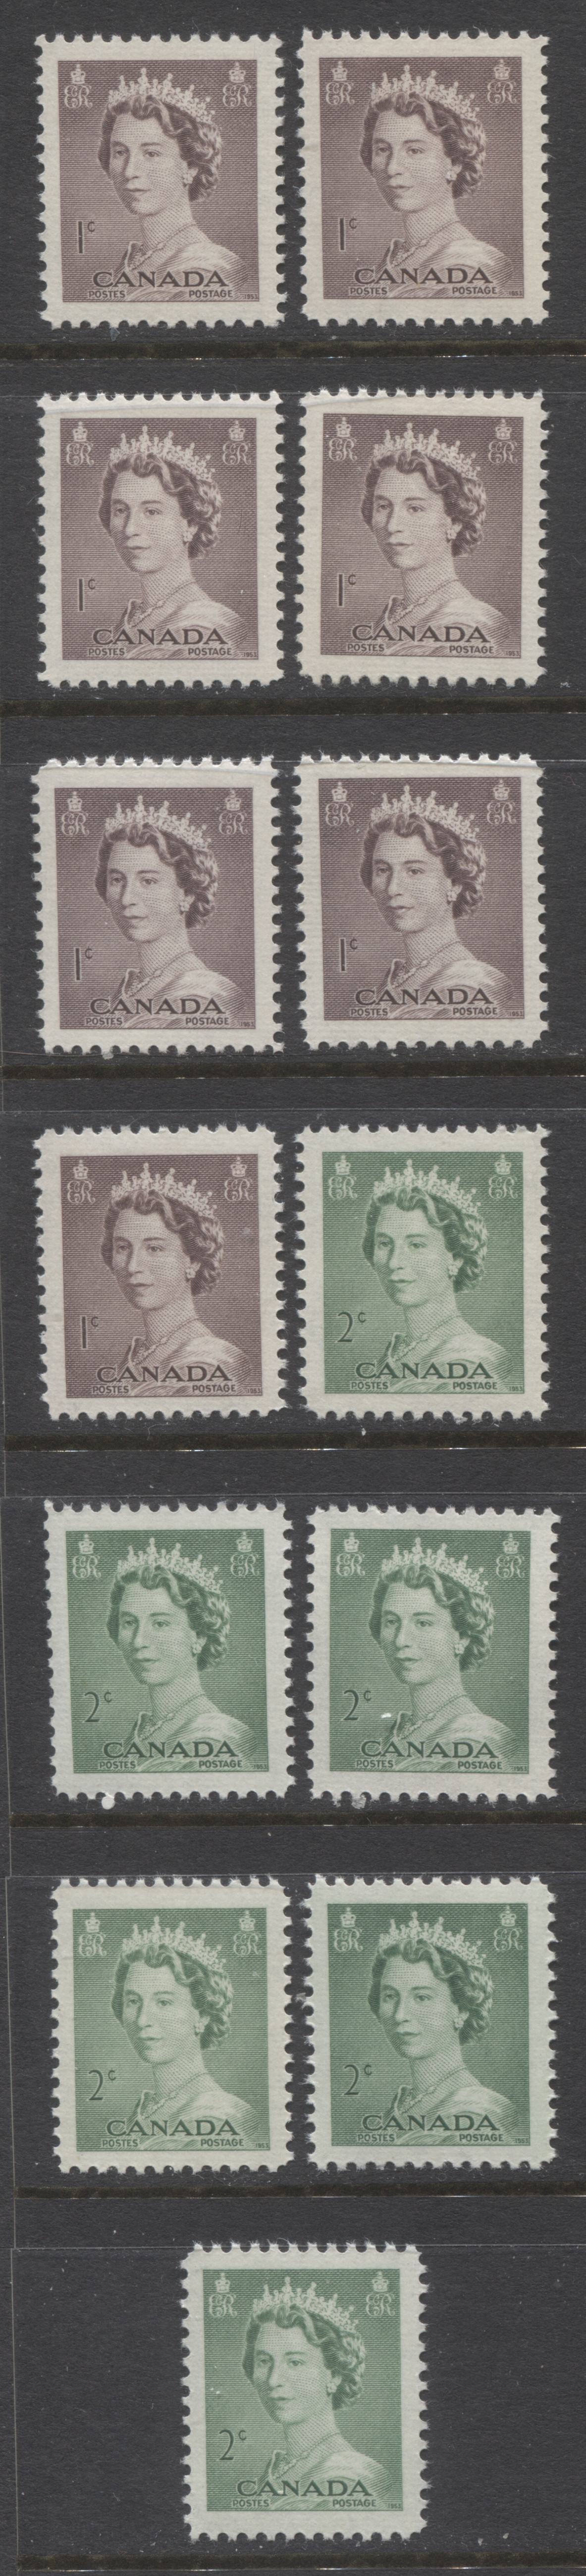 Lot 230 Canada #325-326 1c-2c Violet Brown & Pale Green Queen Elizabeth II, 1953-1954 Karsh Issue, 13 VFNH Singles, Various Shades, Many Different Perfs